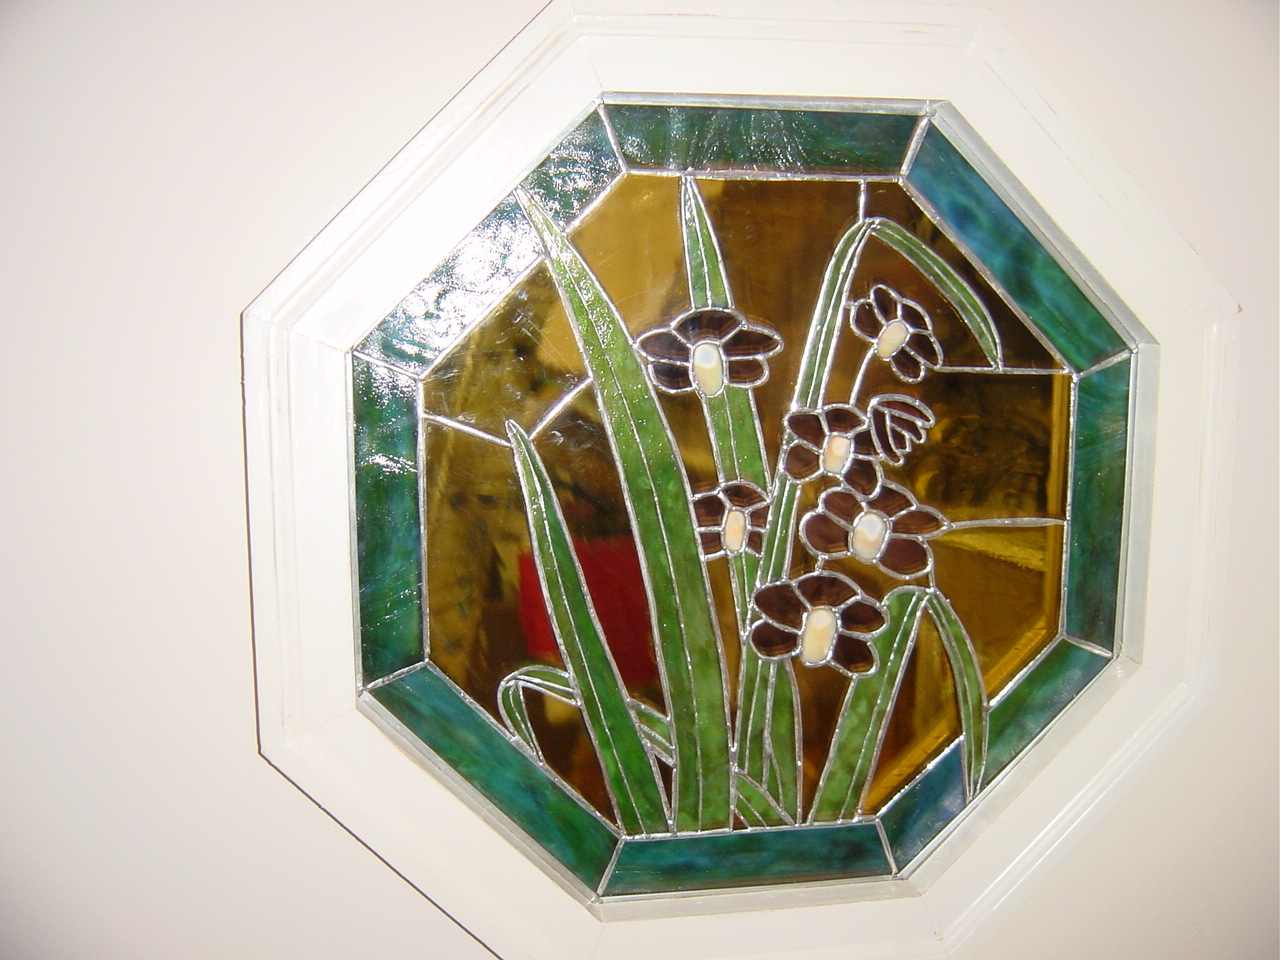  This is suposted to be my first piece, an octaginal 2'x2' window.